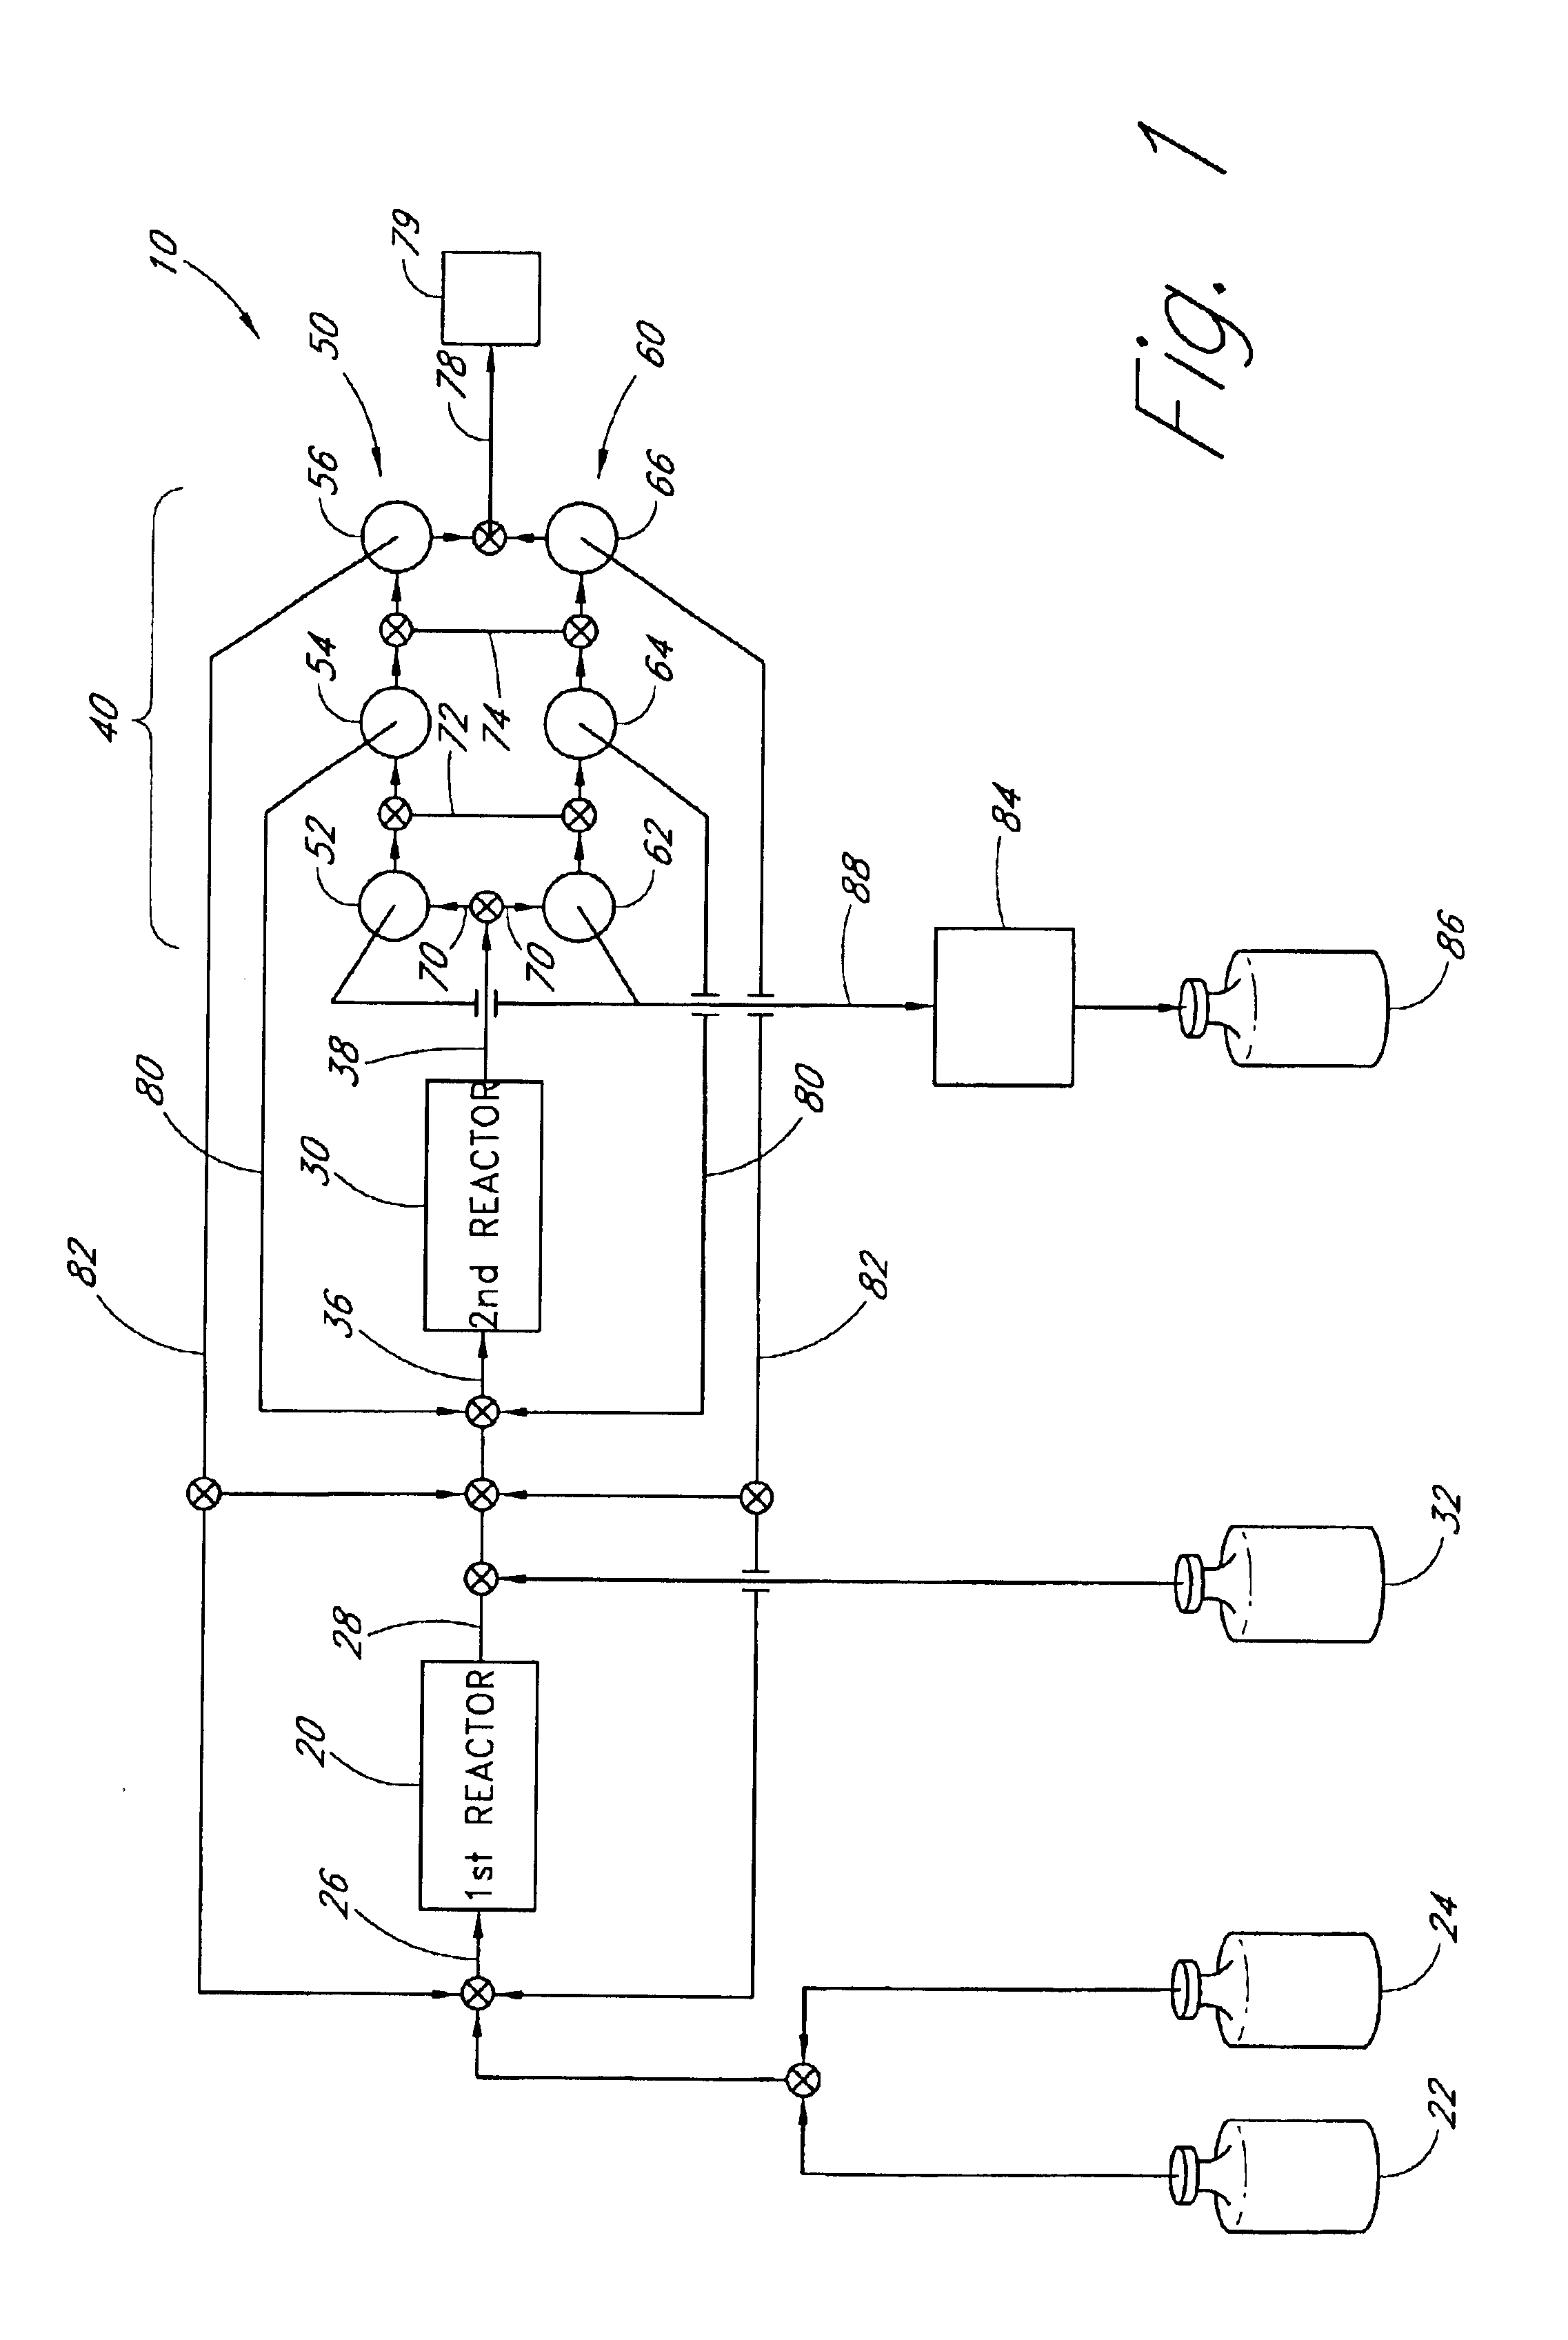 Method and apparatus for chemical synthesis